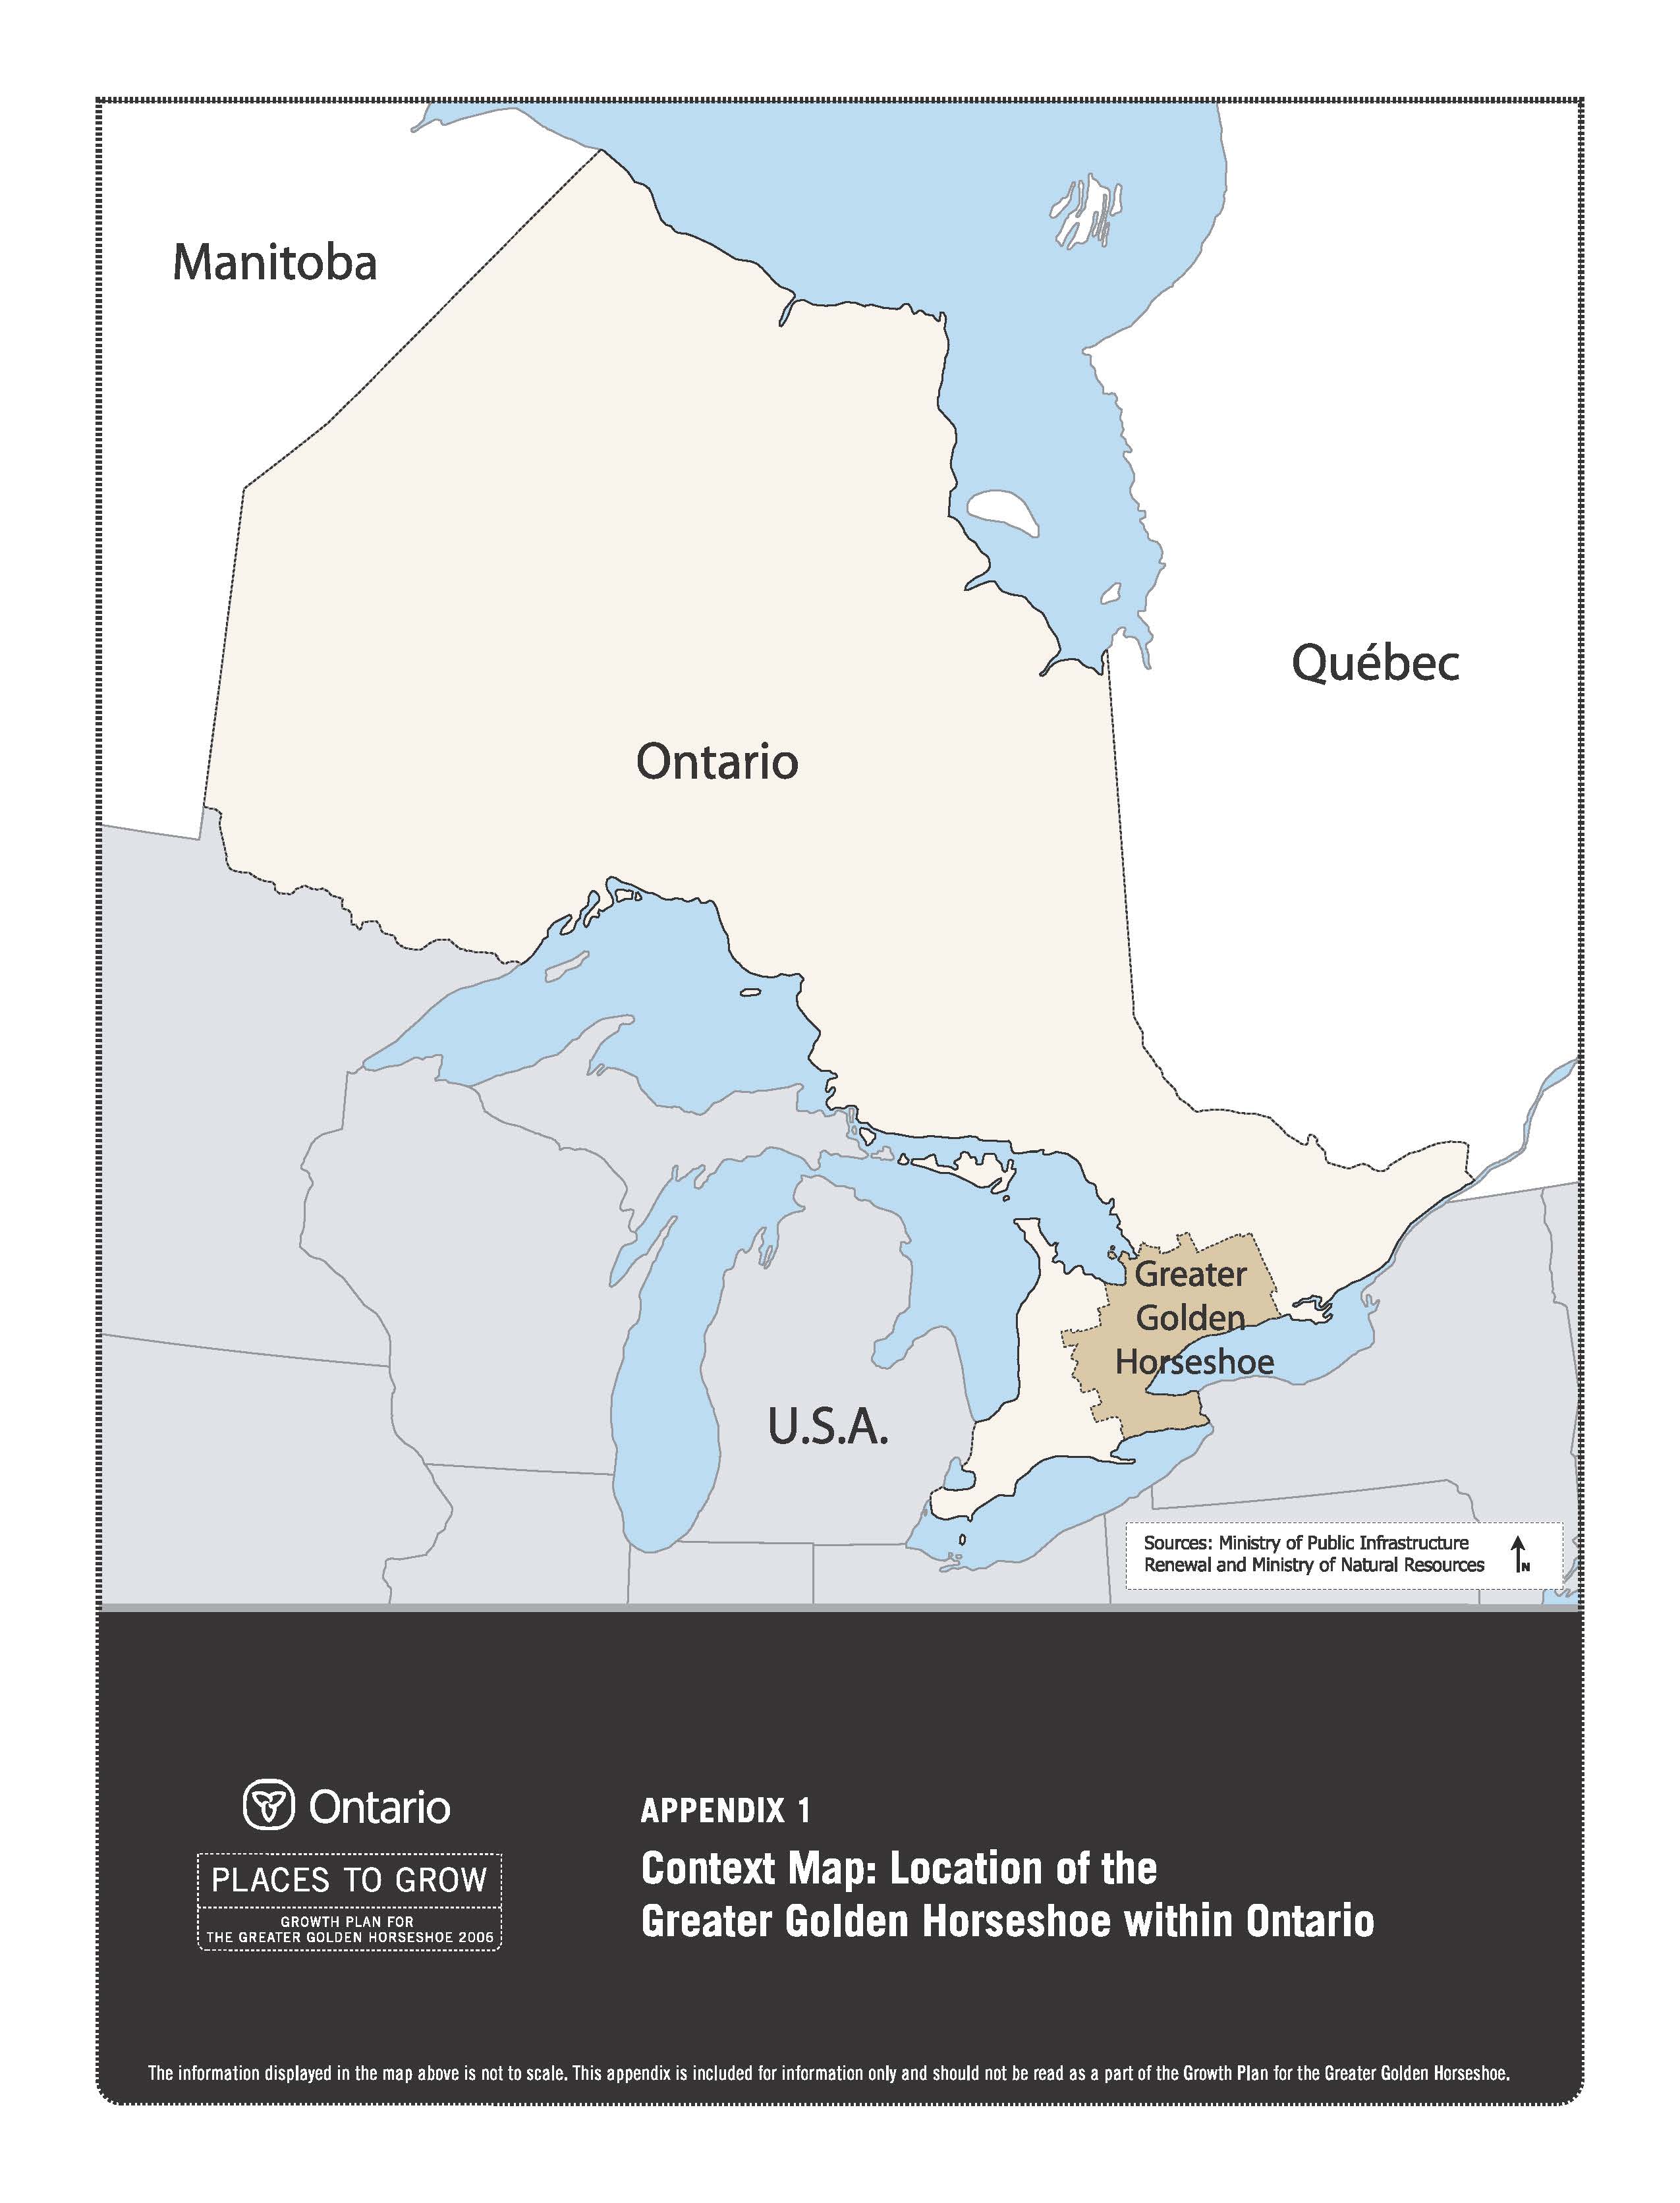 Appendix 1 - Context Map: Location of the Greater Golden Horseshoe within Ontario